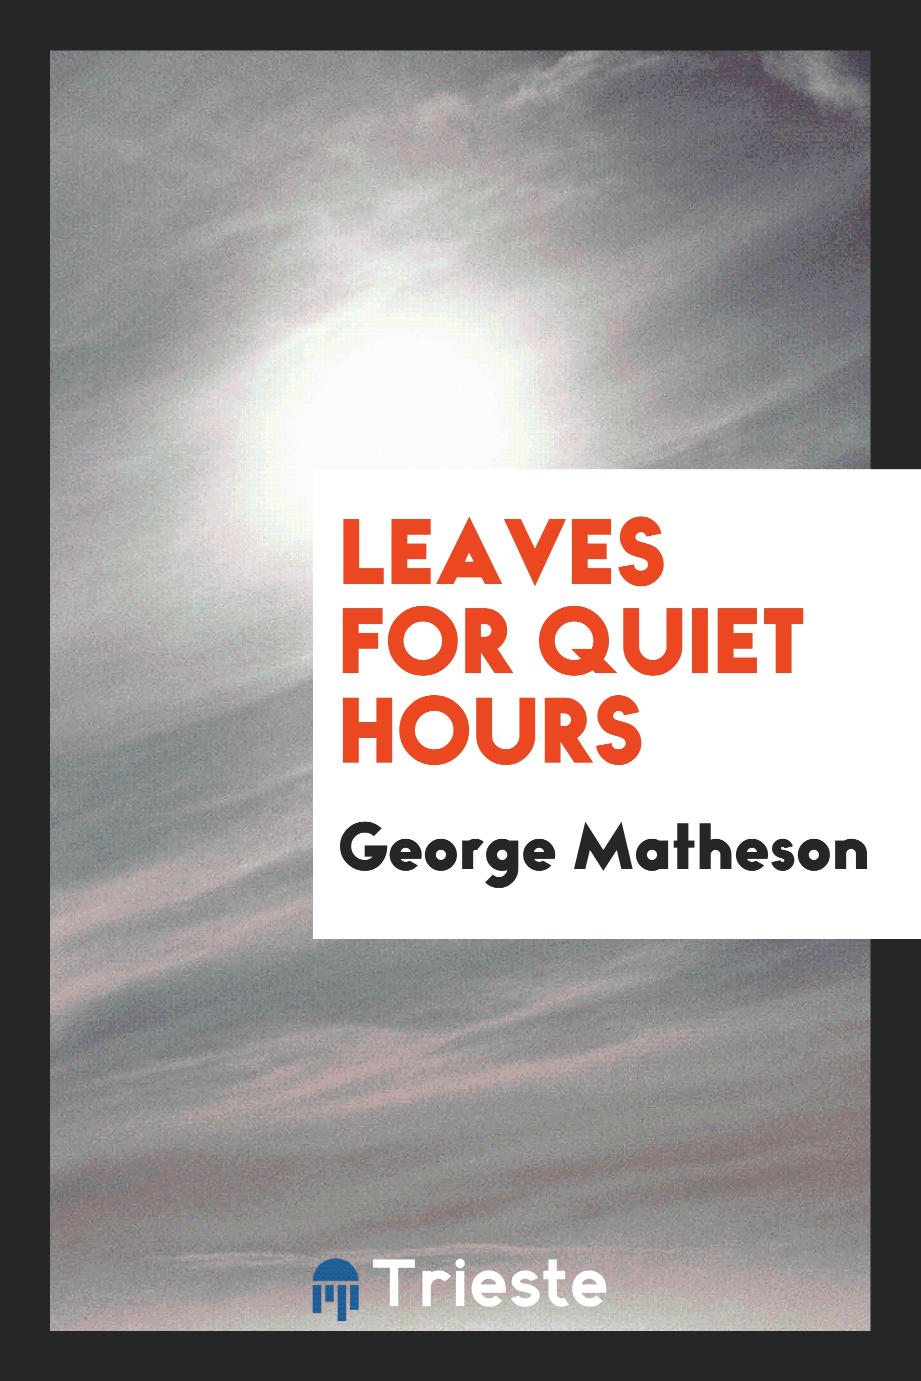 Leaves for quiet hours